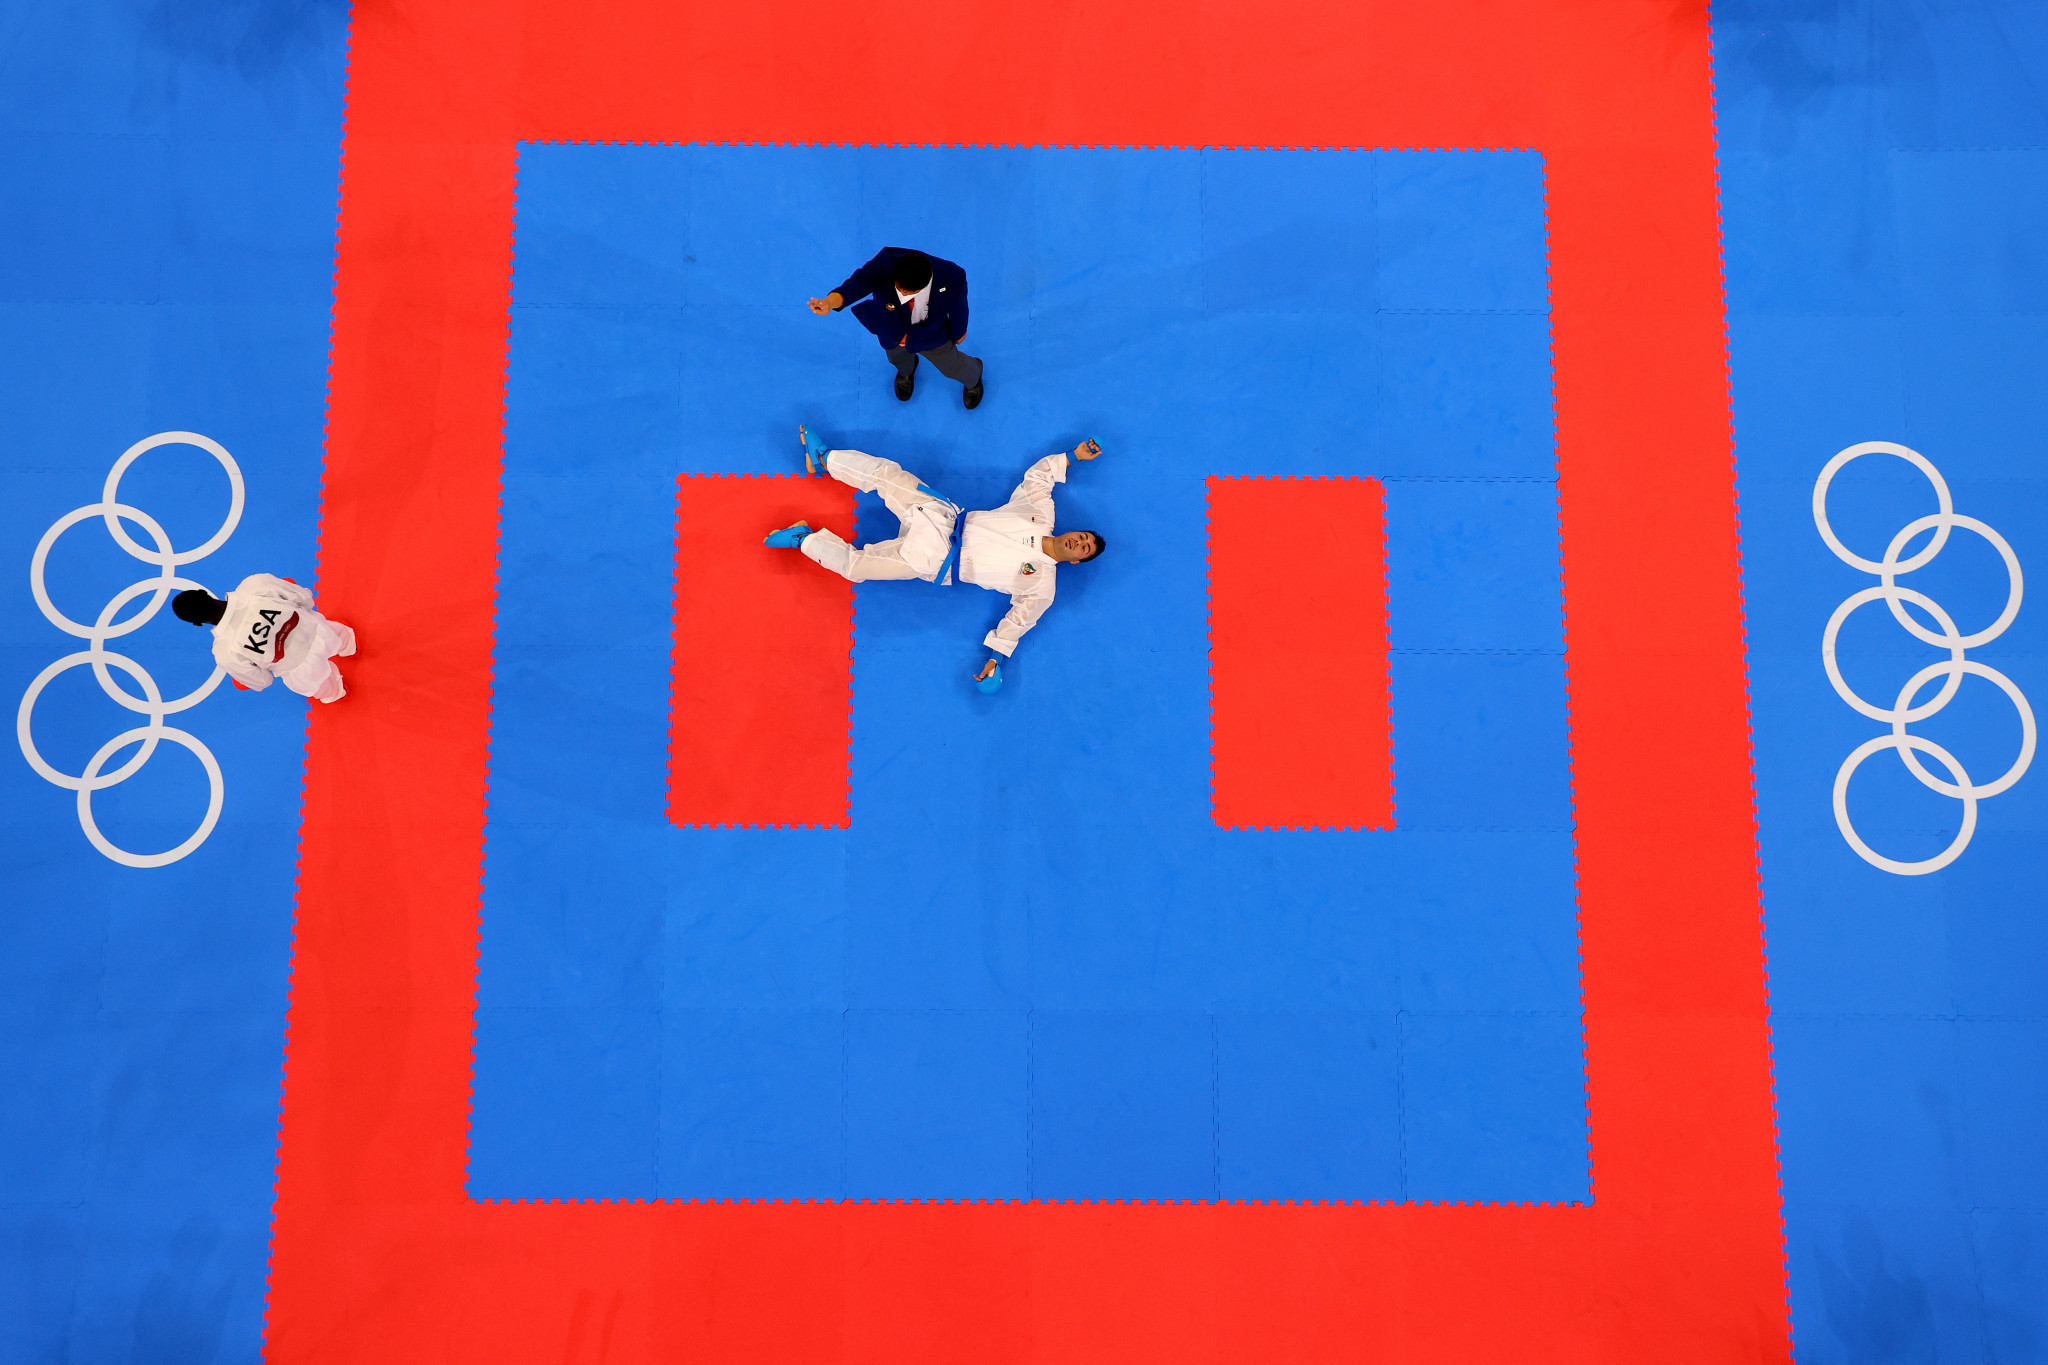 Karate appeared on the Olympic programme for the first time at Tokyo 2020, but its presence was short-lived ©Getty Images